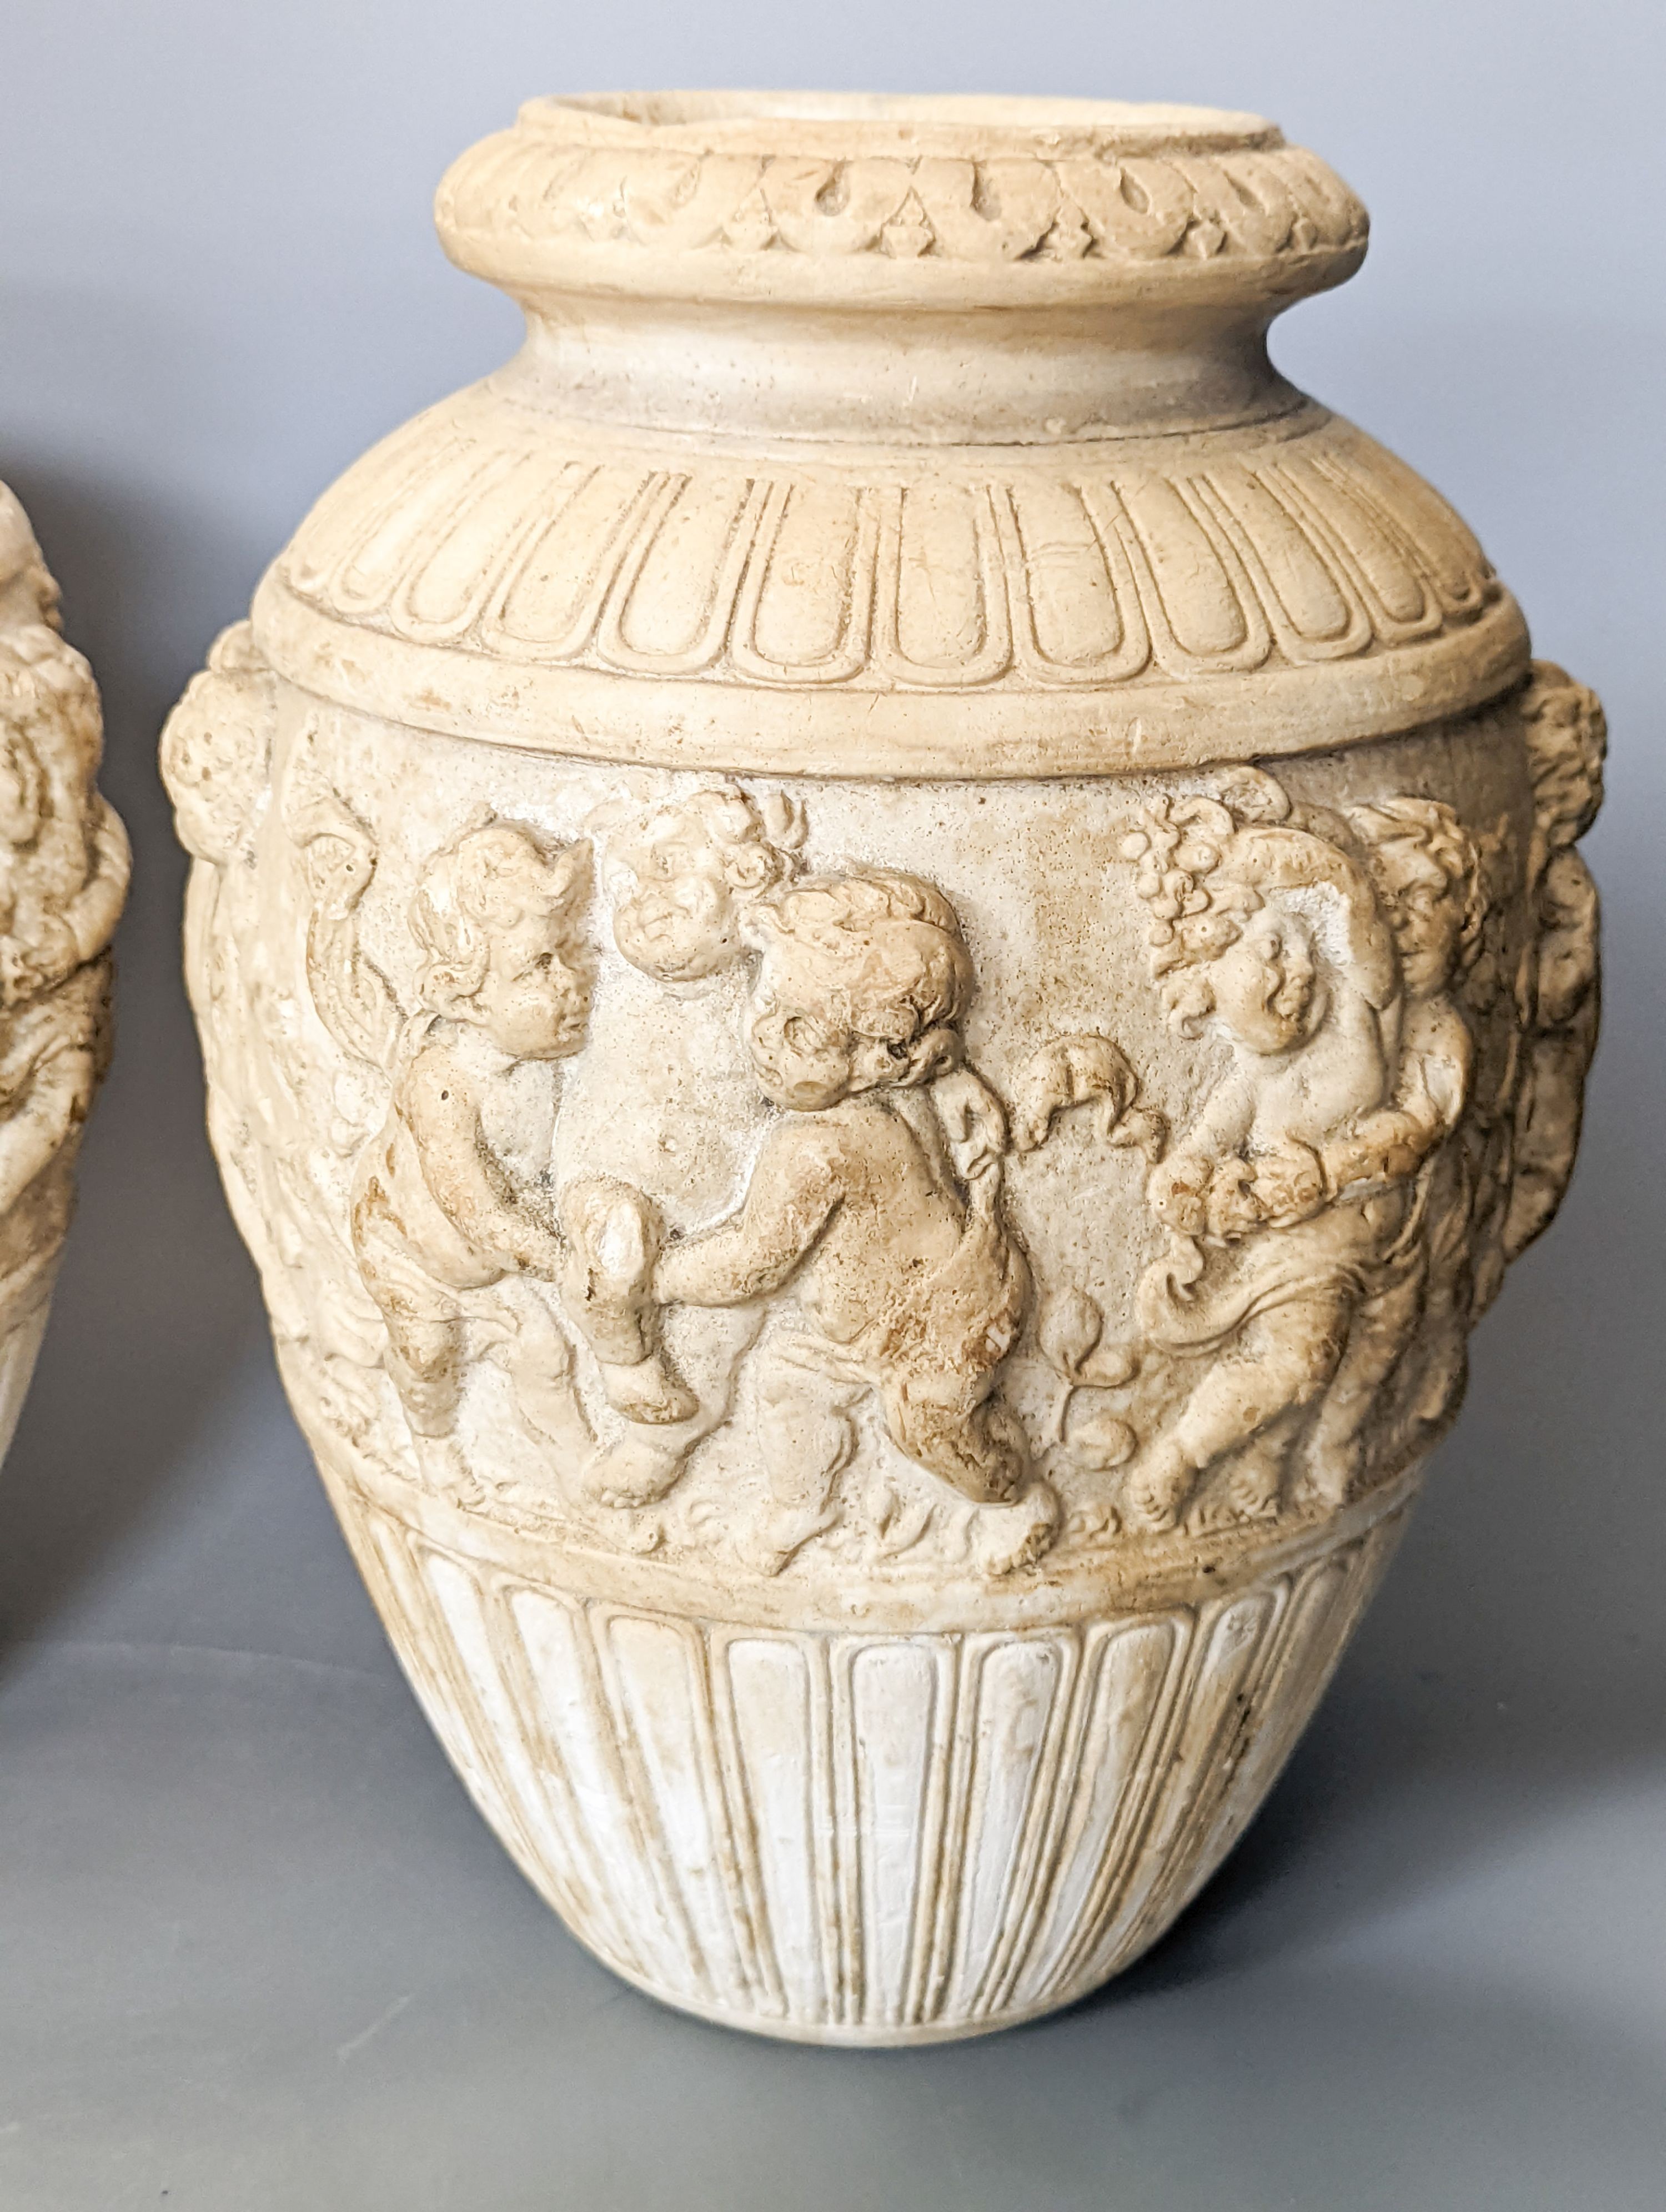 A pair of 19th century earthenware vases moulded in Italian renaissance style 30cm